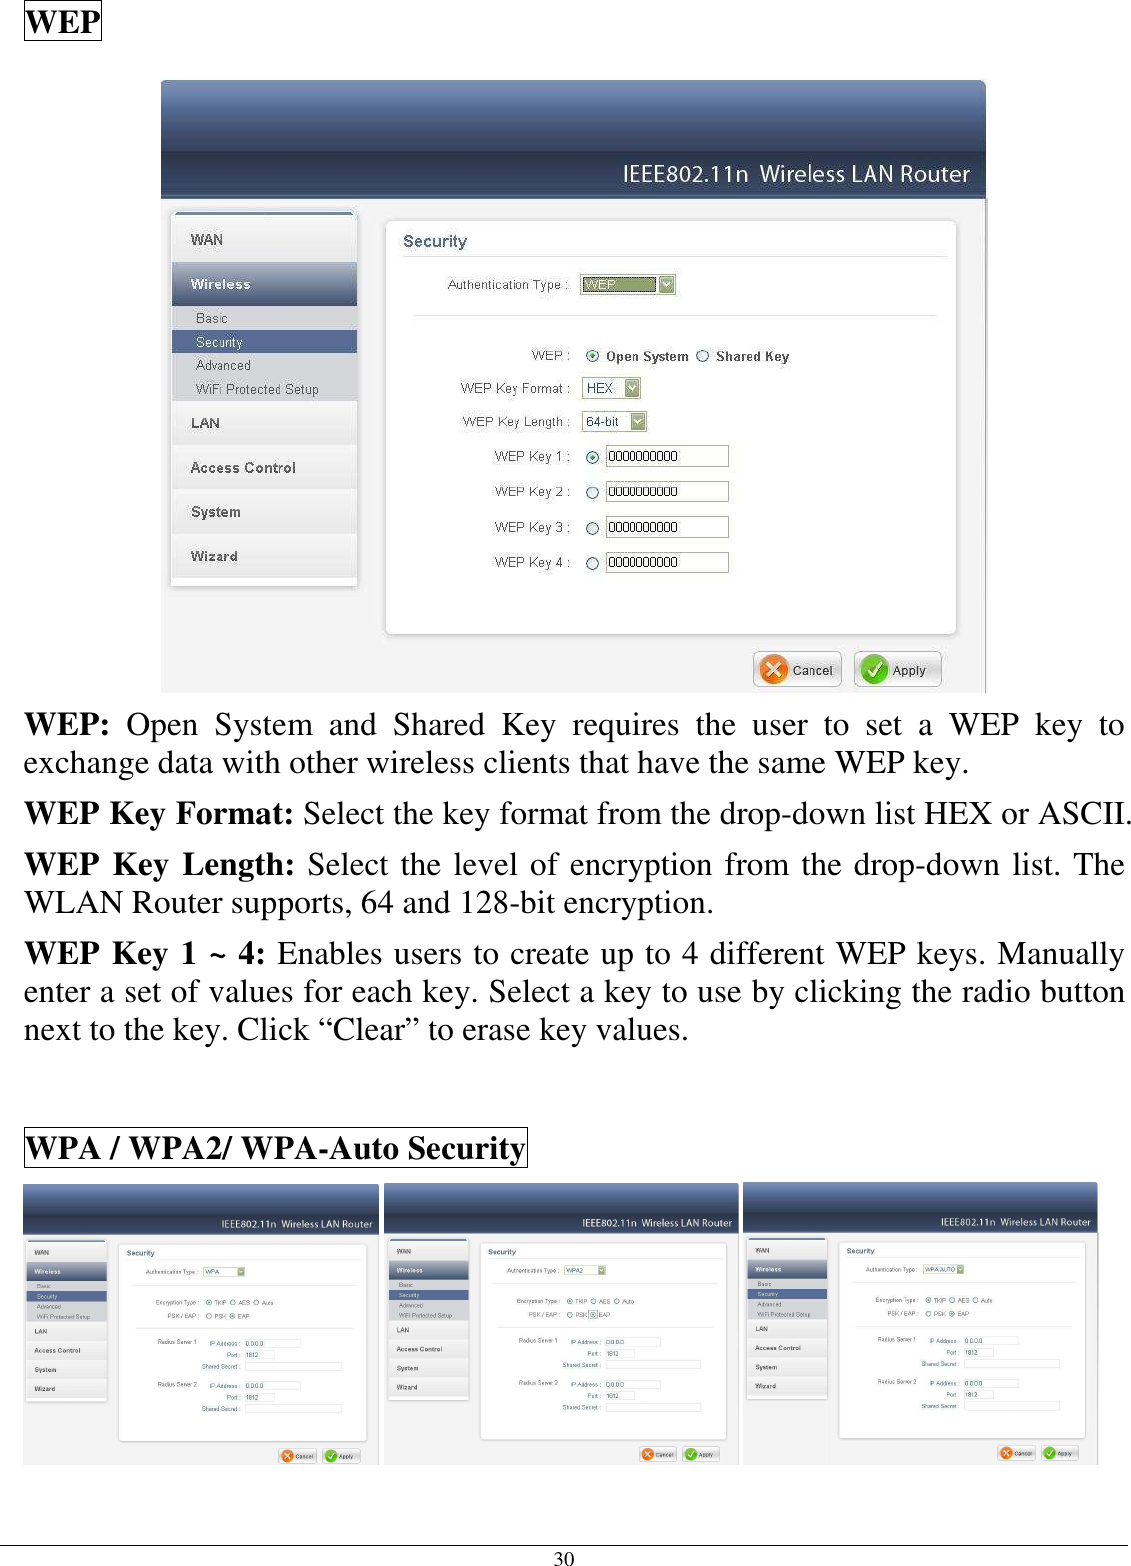 30 WEP  WEP:  Open  System  and  Shared  Key  requires  the  user  to  set  a  WEP  key  to exchange data with other wireless clients that have the same WEP key. WEP Key Format: Select the key format from the drop-down list HEX or ASCII. WEP Key Length: Select the level of encryption from the drop-down list. The WLAN Router supports, 64 and 128-bit encryption. WEP Key 1 ~ 4: Enables users to create up to 4 different WEP keys. Manually enter a set of values for each key. Select a key to use by clicking the radio button next to the key. Click “Clear” to erase key values.  WPA / WPA2/ WPA-Auto Security       